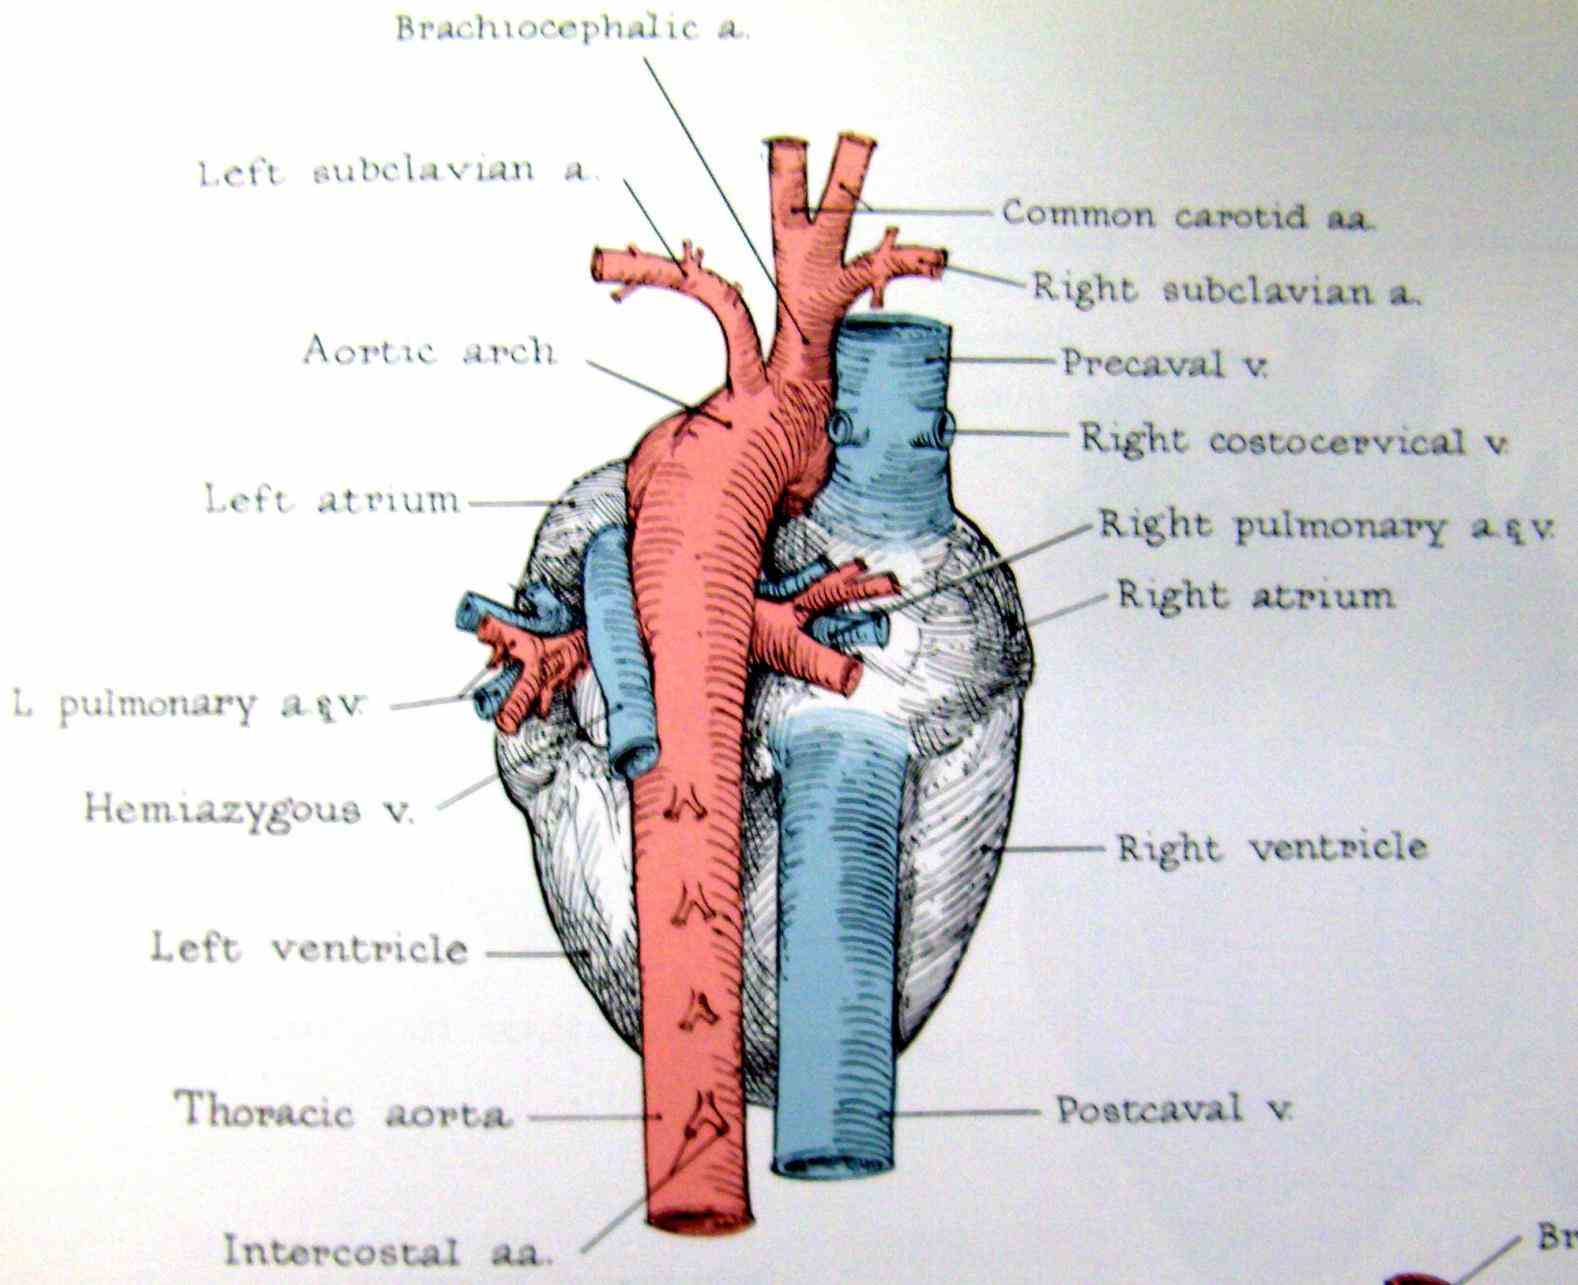 the great vessels of heart provide passage blood to and from arteries veins there are four in all corresponding